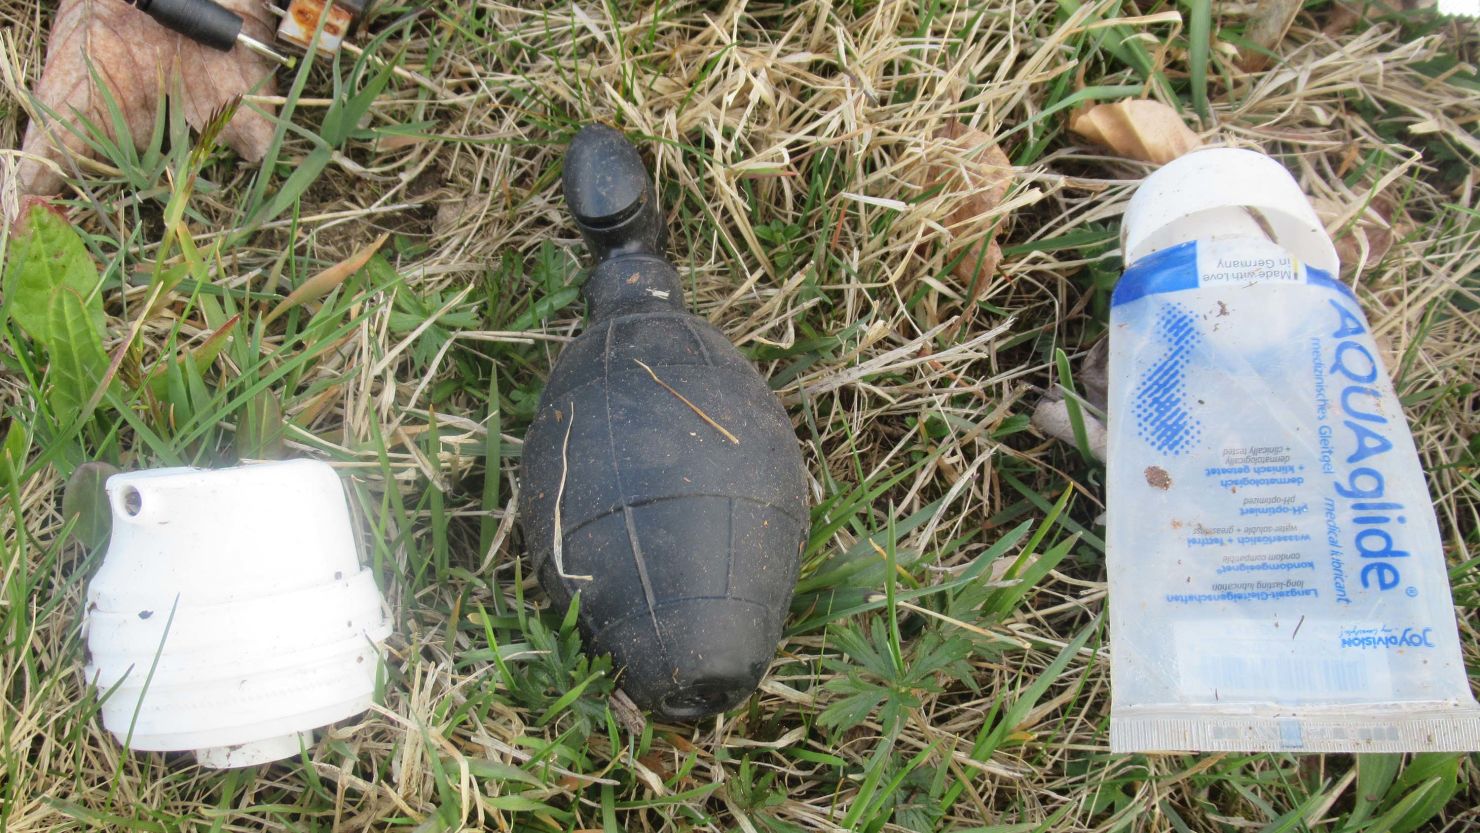 The grenade-shaped object was found to be a sex toy.